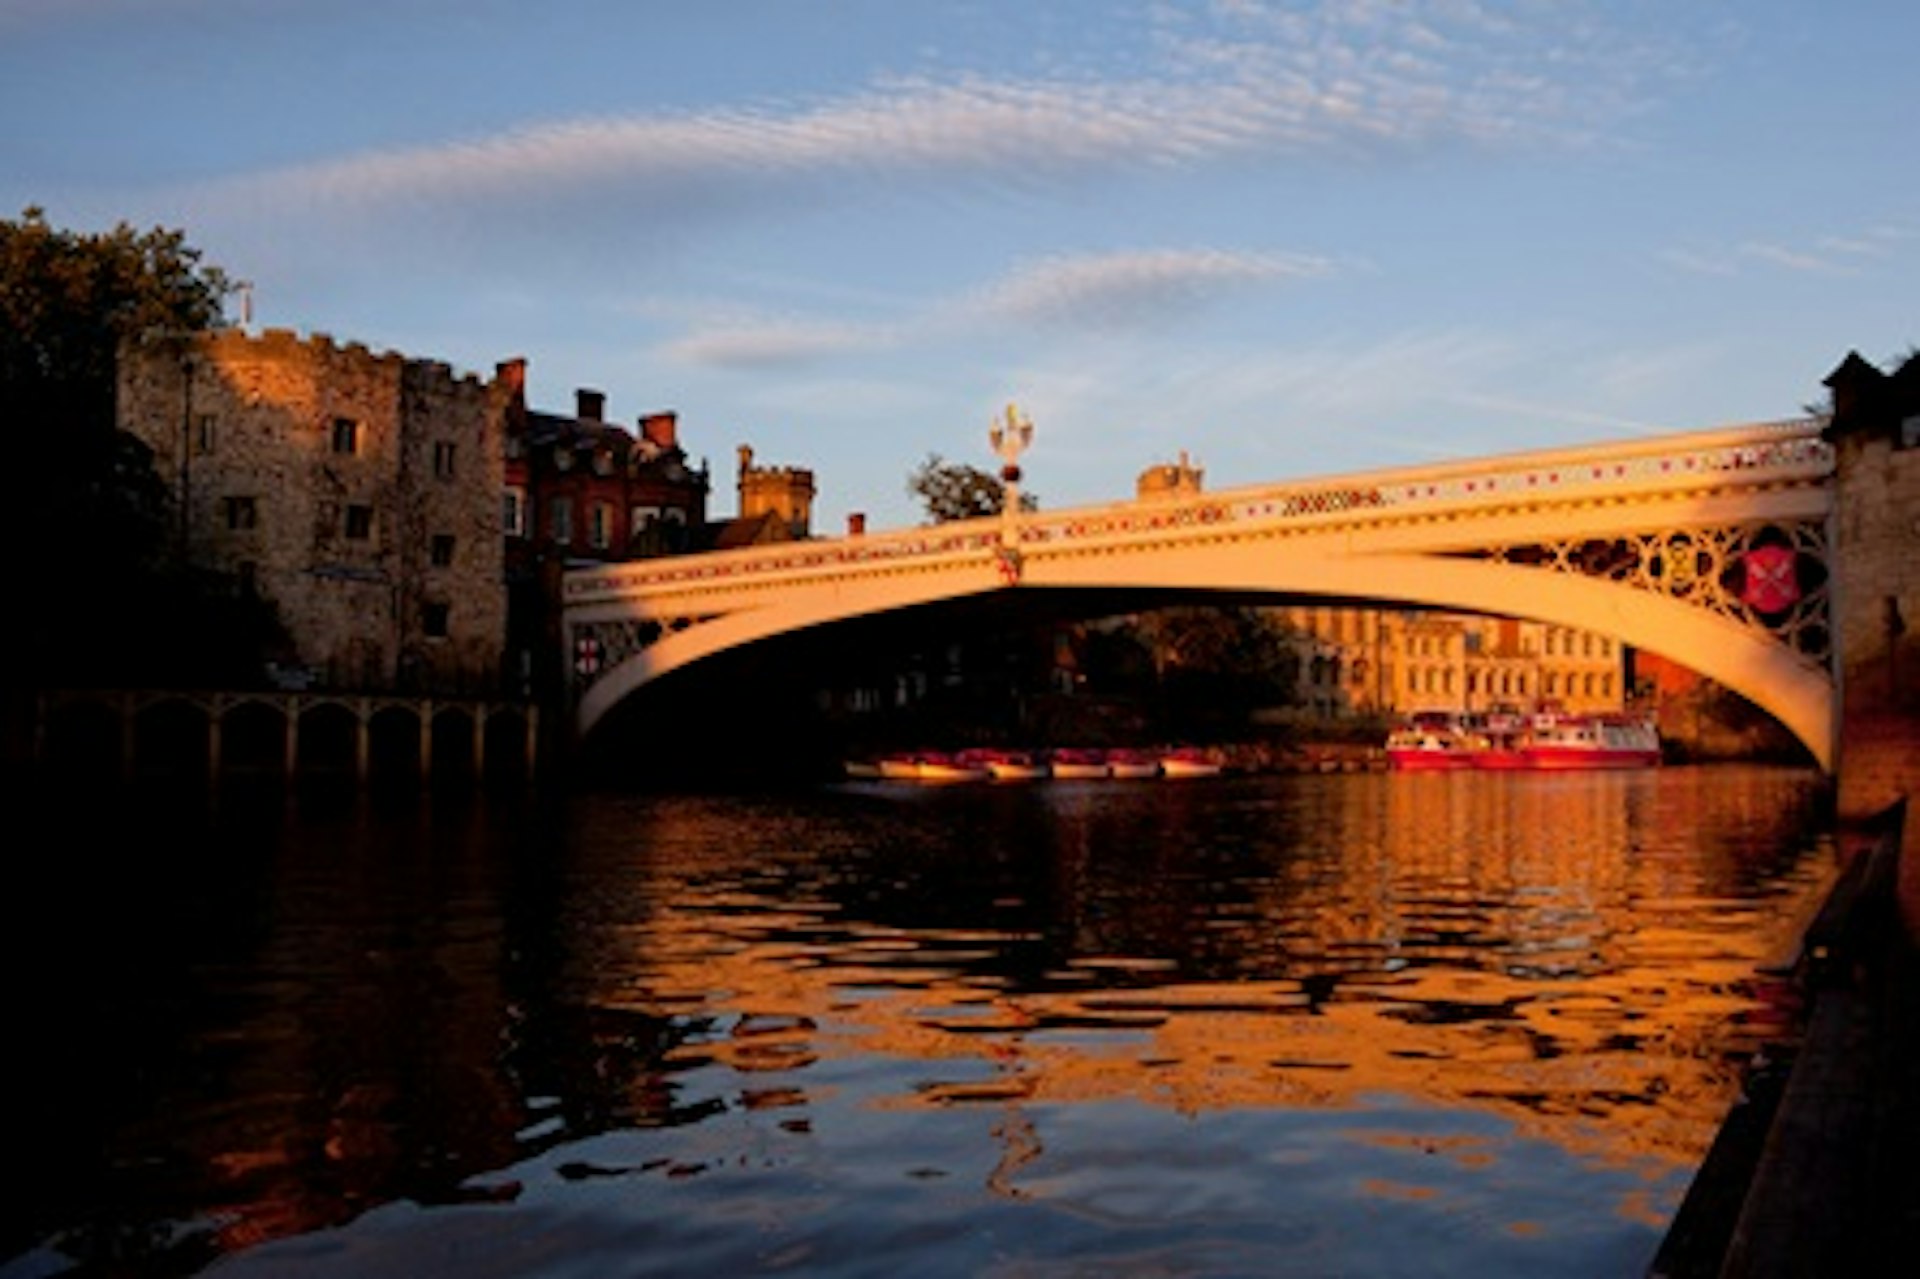 City of York Dinner River Cruise for Two 2